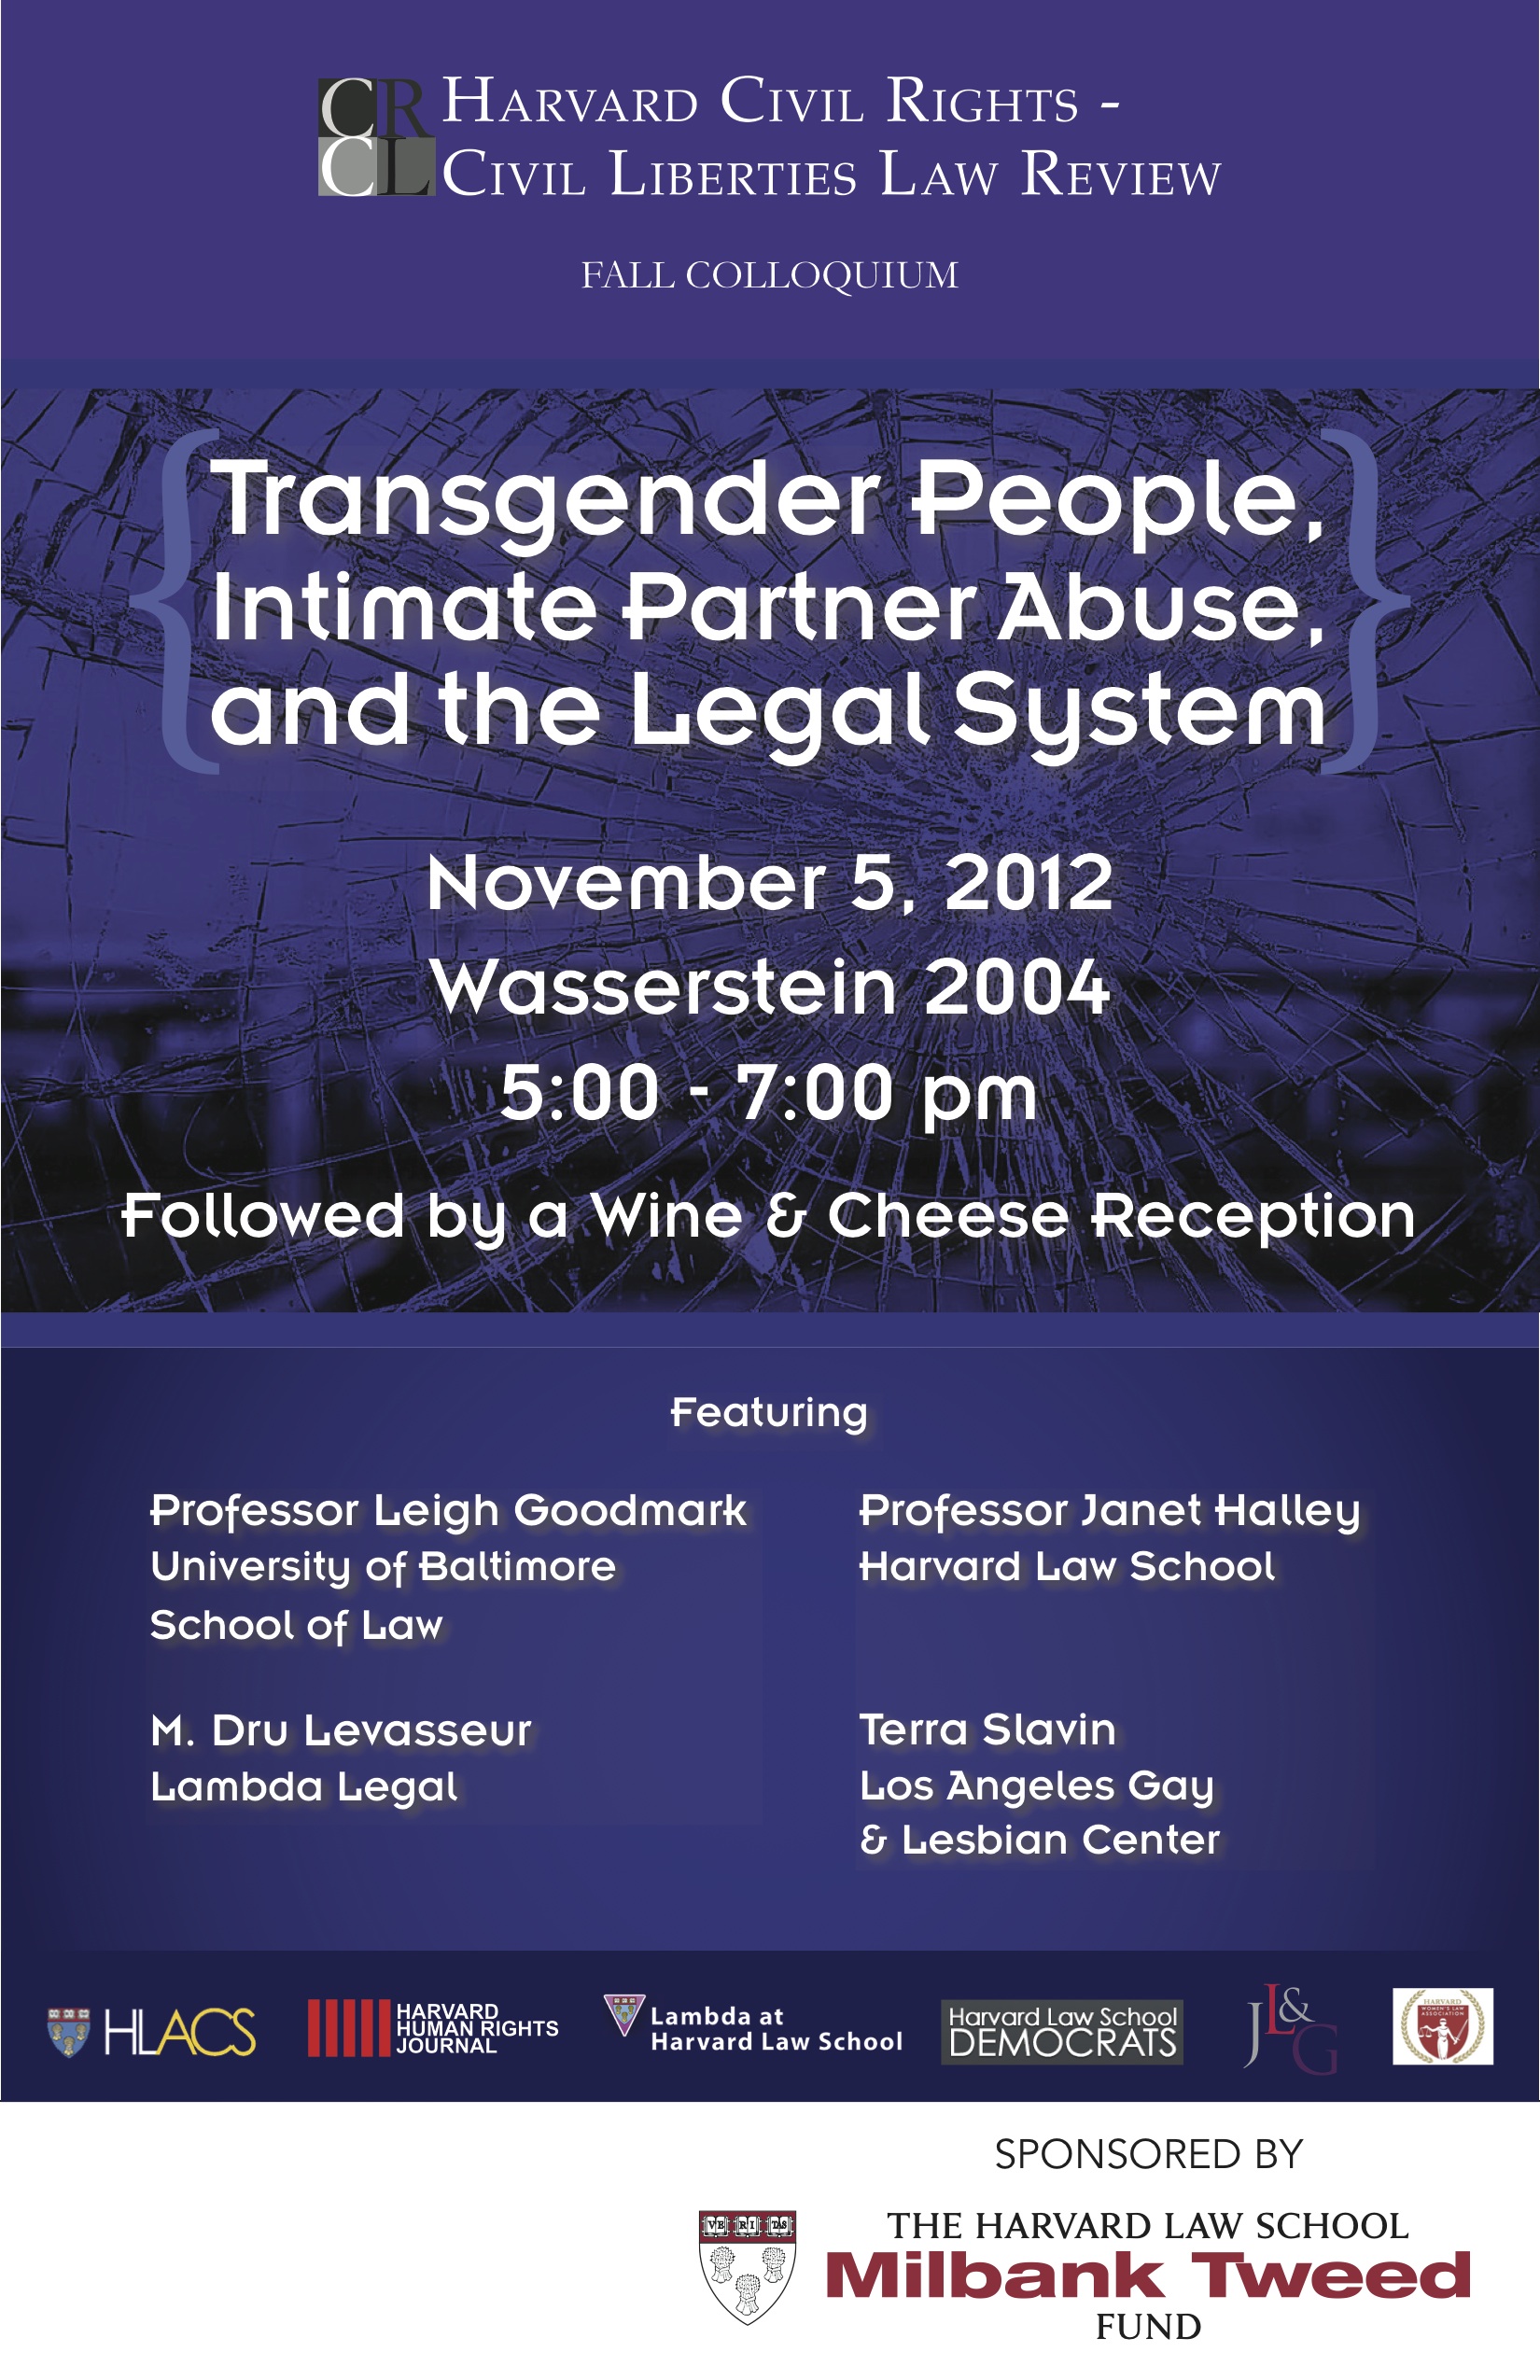 Colloquium: Transgender People, Intimate Partner Abuse, and the Legal System